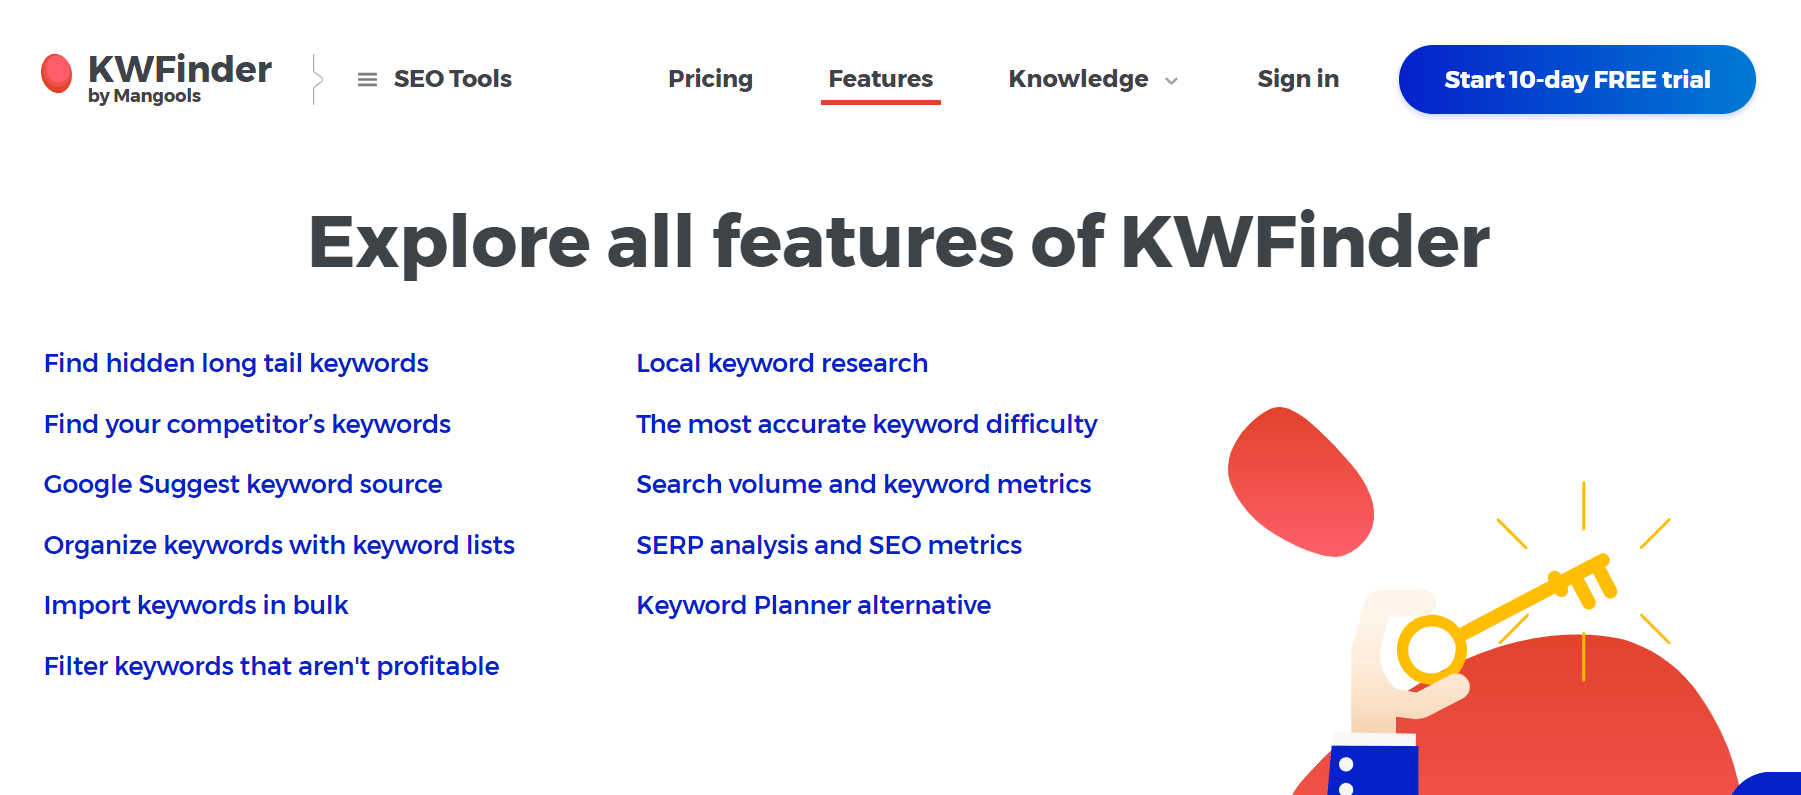 KWFinder by Mangools  features